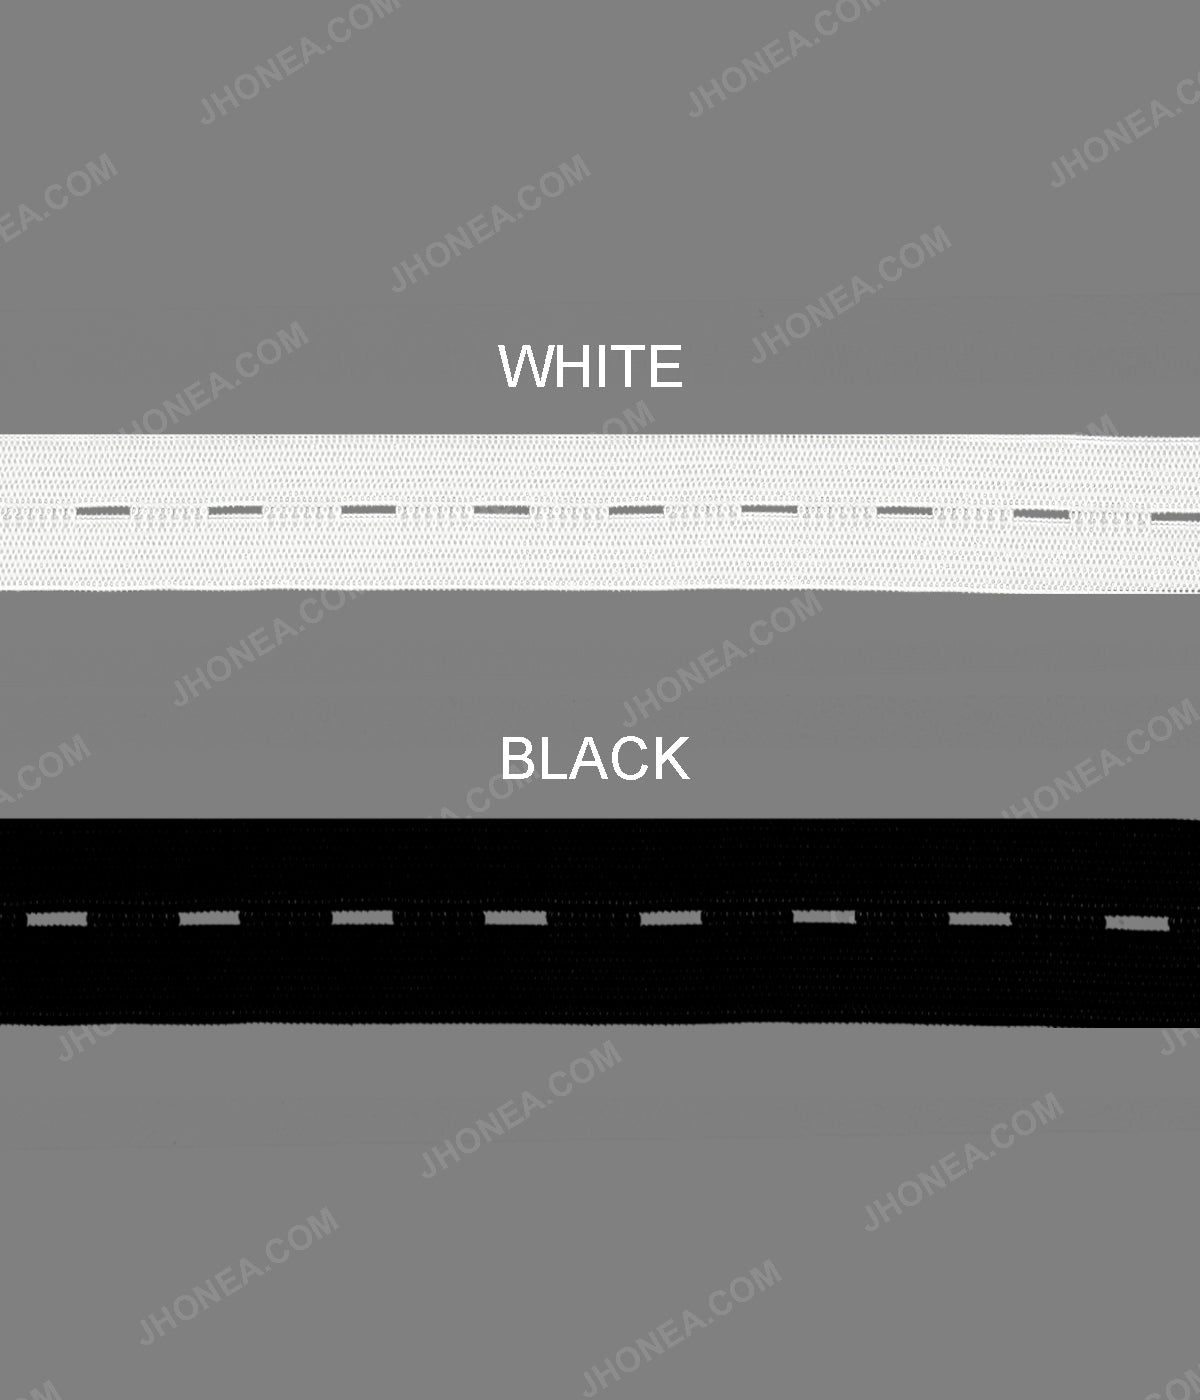 Plain Black & White Sewing Knitted Buttonhole Adjustable Elastic Band